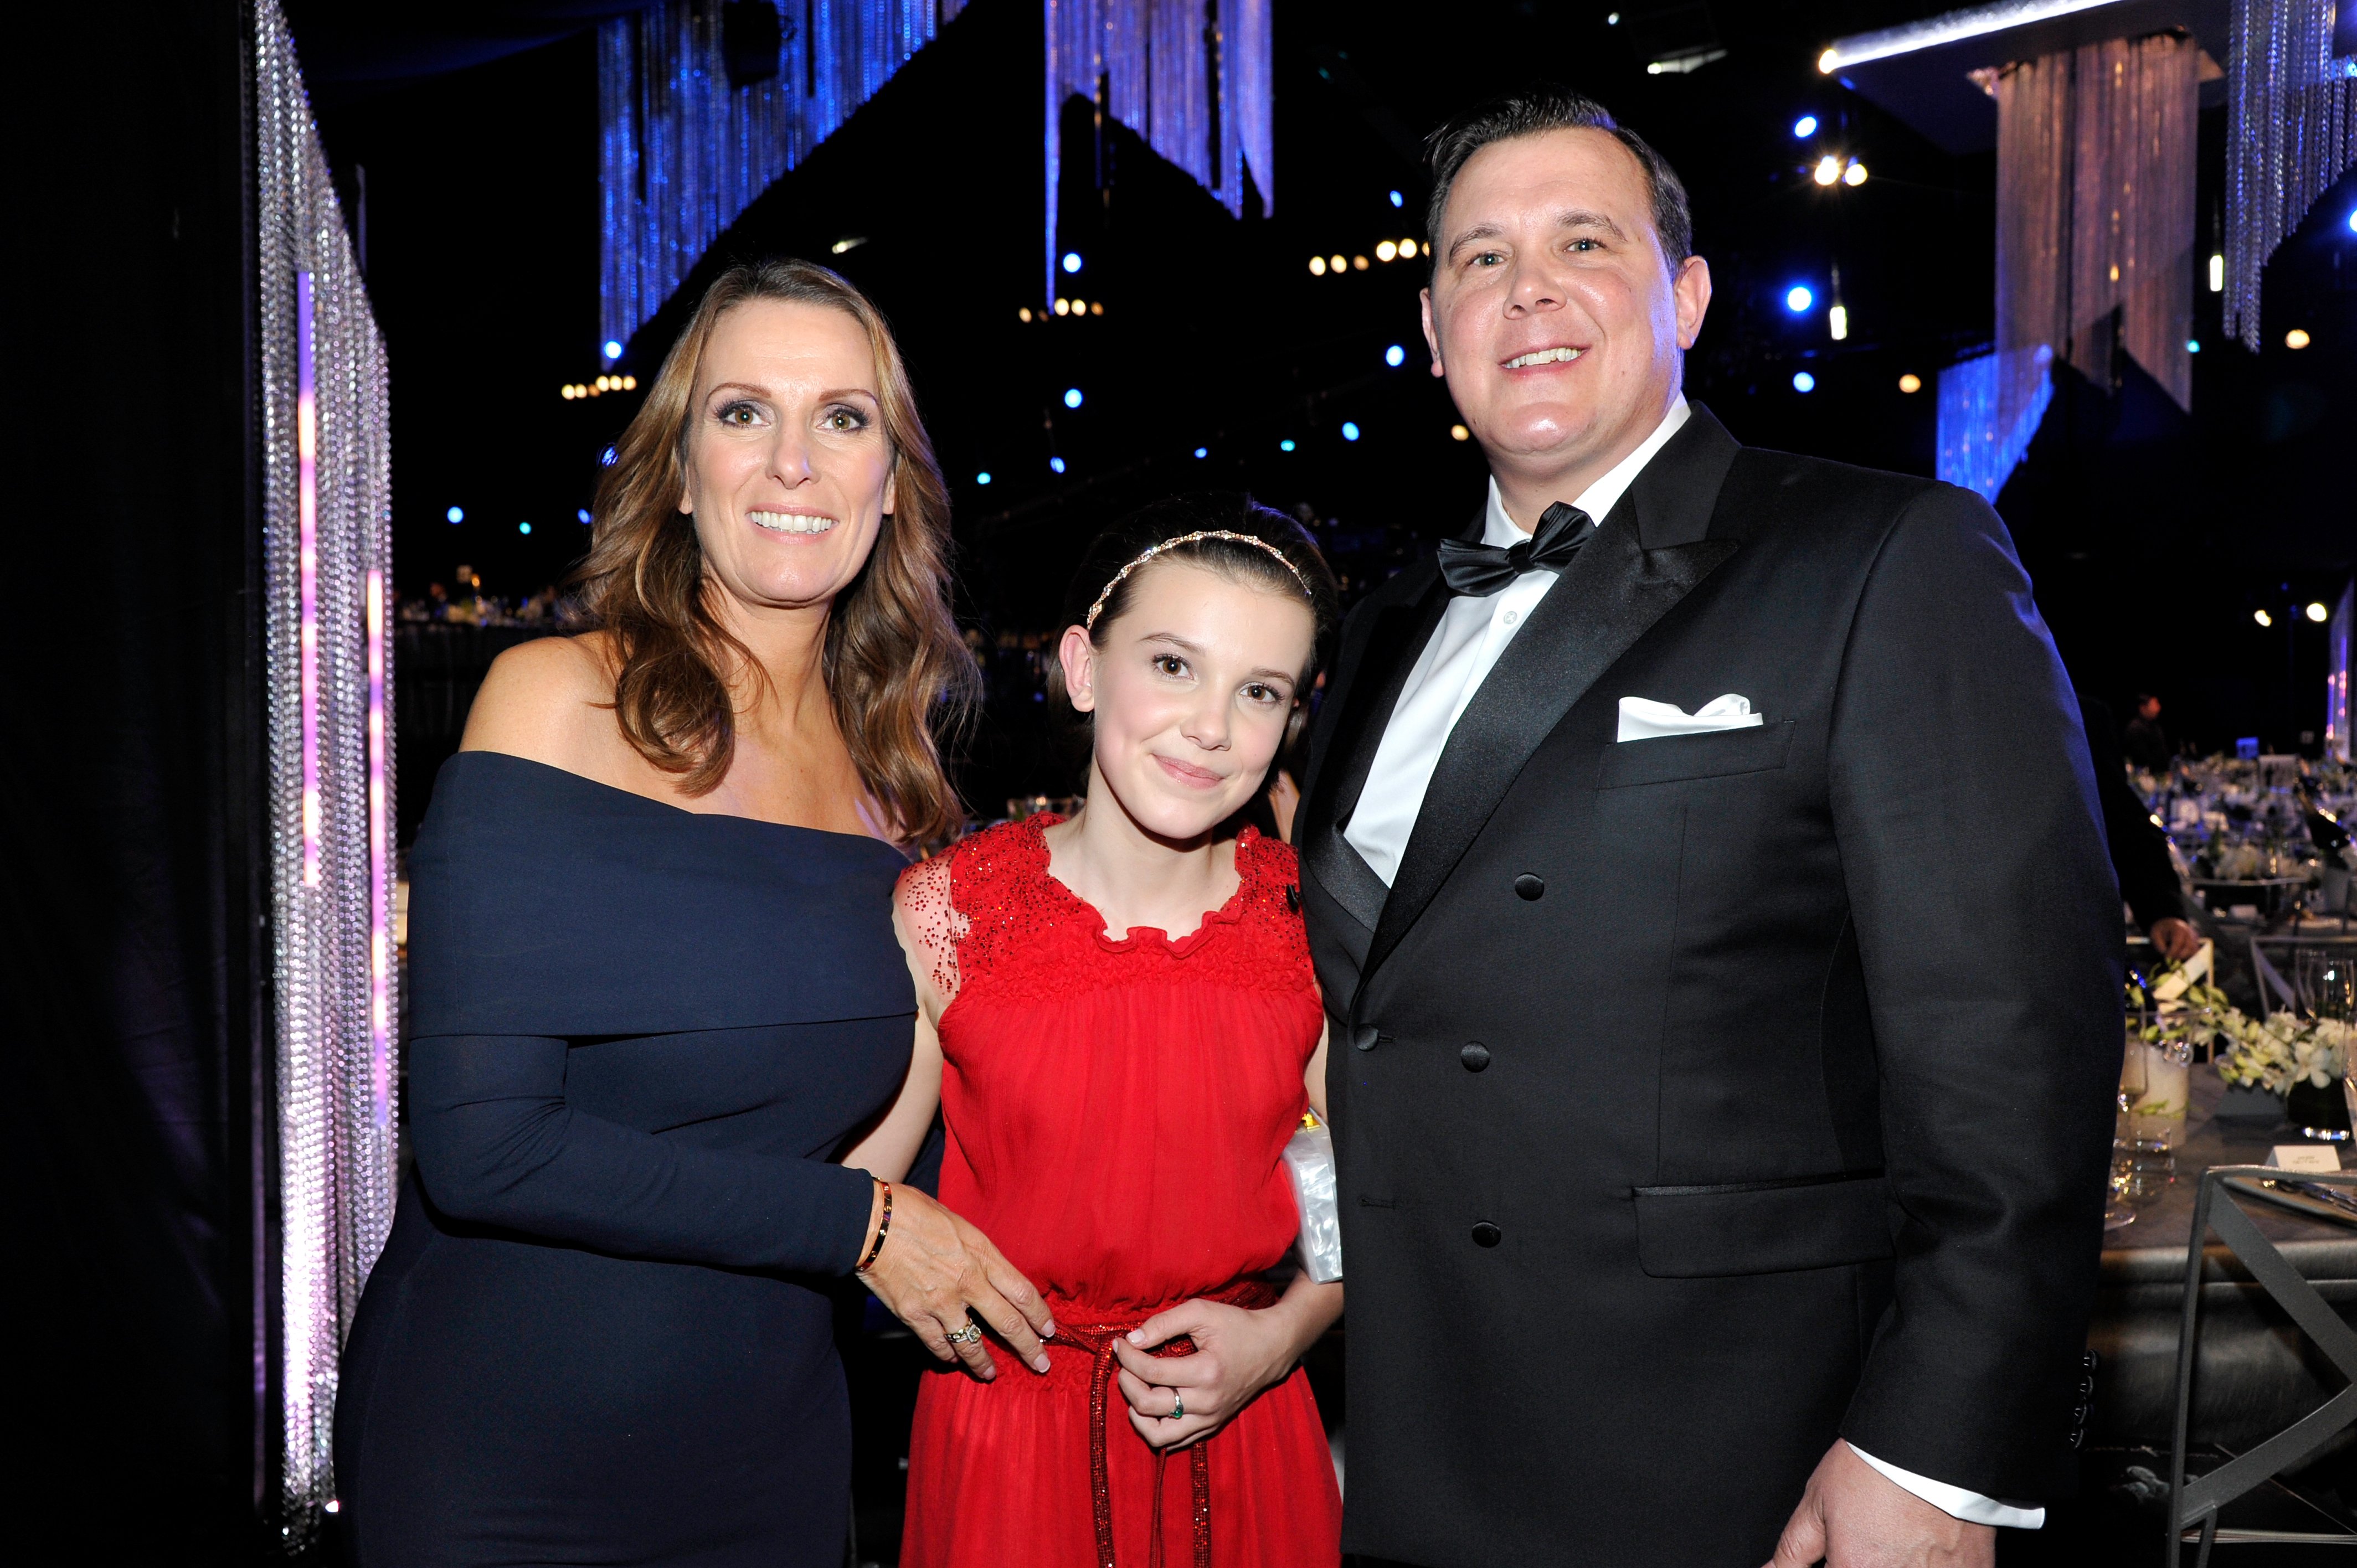 Kelly, Robert and Millie Bobby Brown attend The 23rd Annual Screen Actors Guild Awards at The Shrine Auditorium in Los Angeles, California on January 29, 2017 | Source: Getty Images